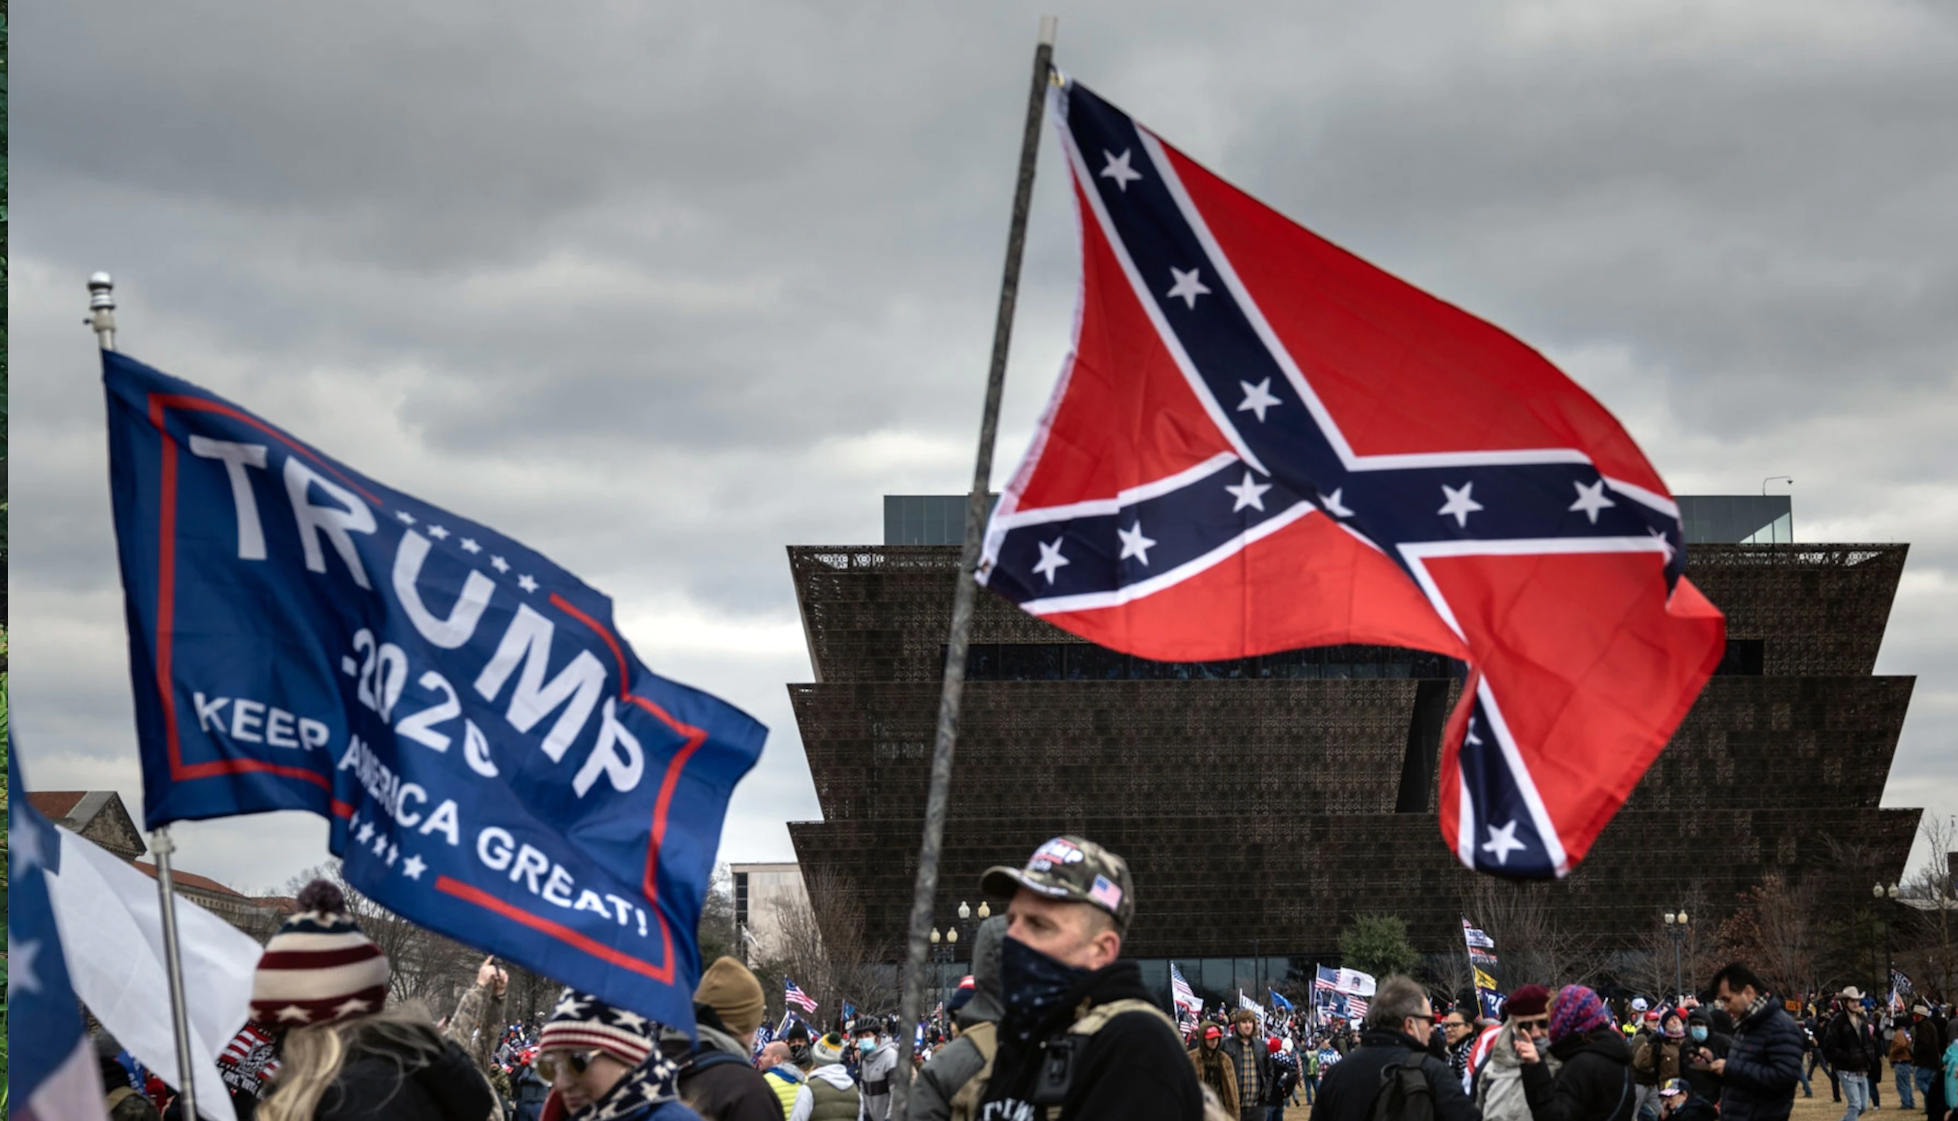 Confederate and Trump flags